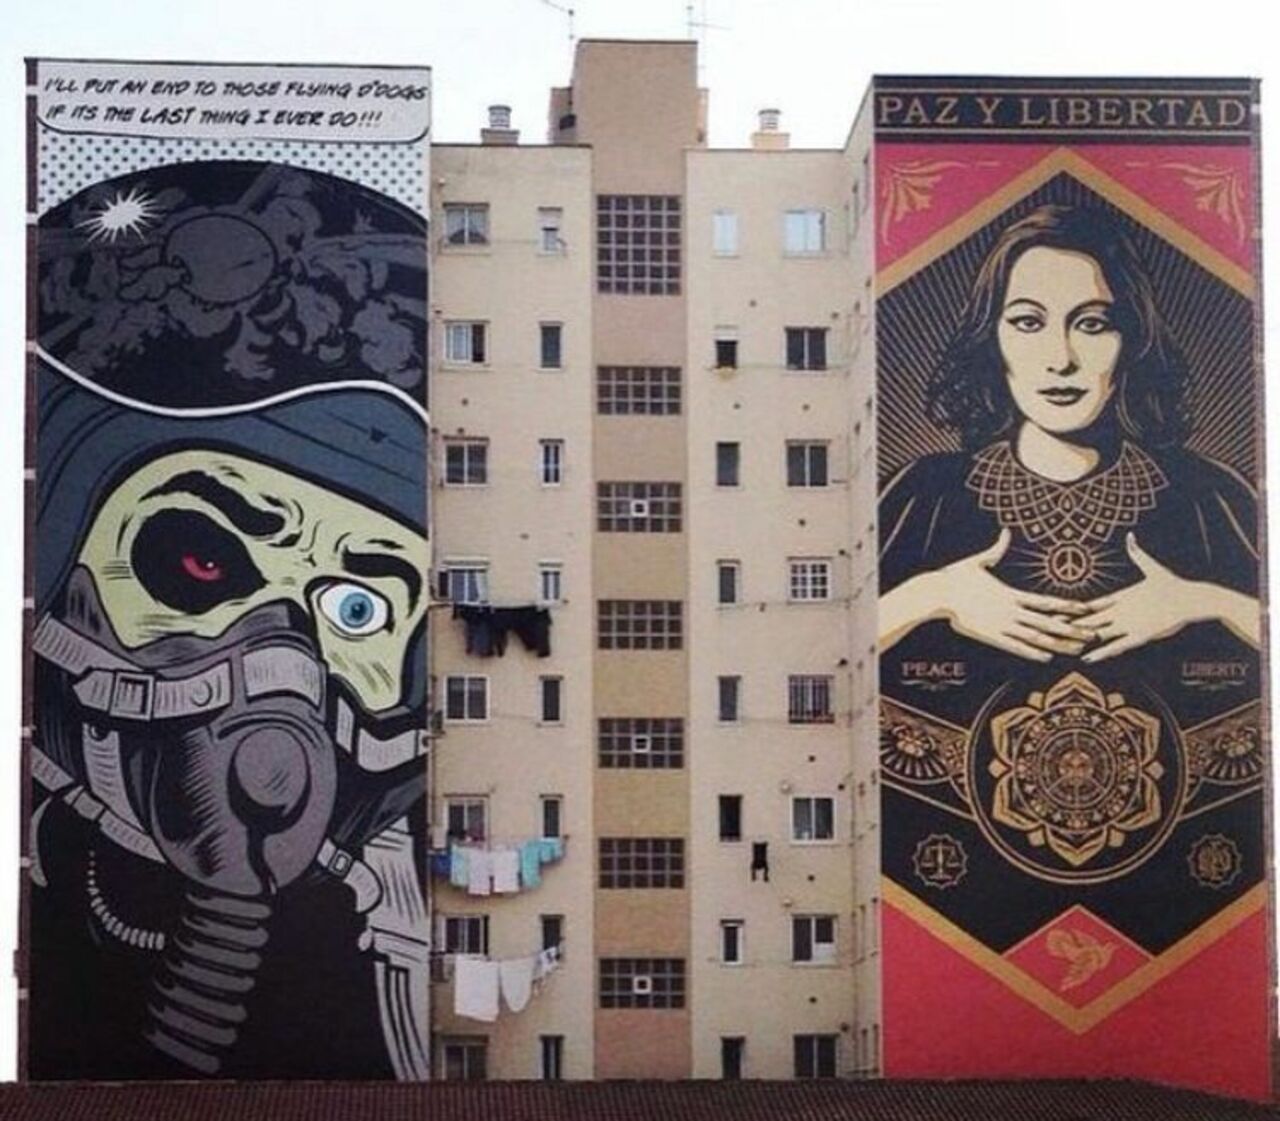 Murals by D*Face and OBEY side by side in Malaga, Spain #streetart #mural #graffiti #art https://t.co/5r6110e951